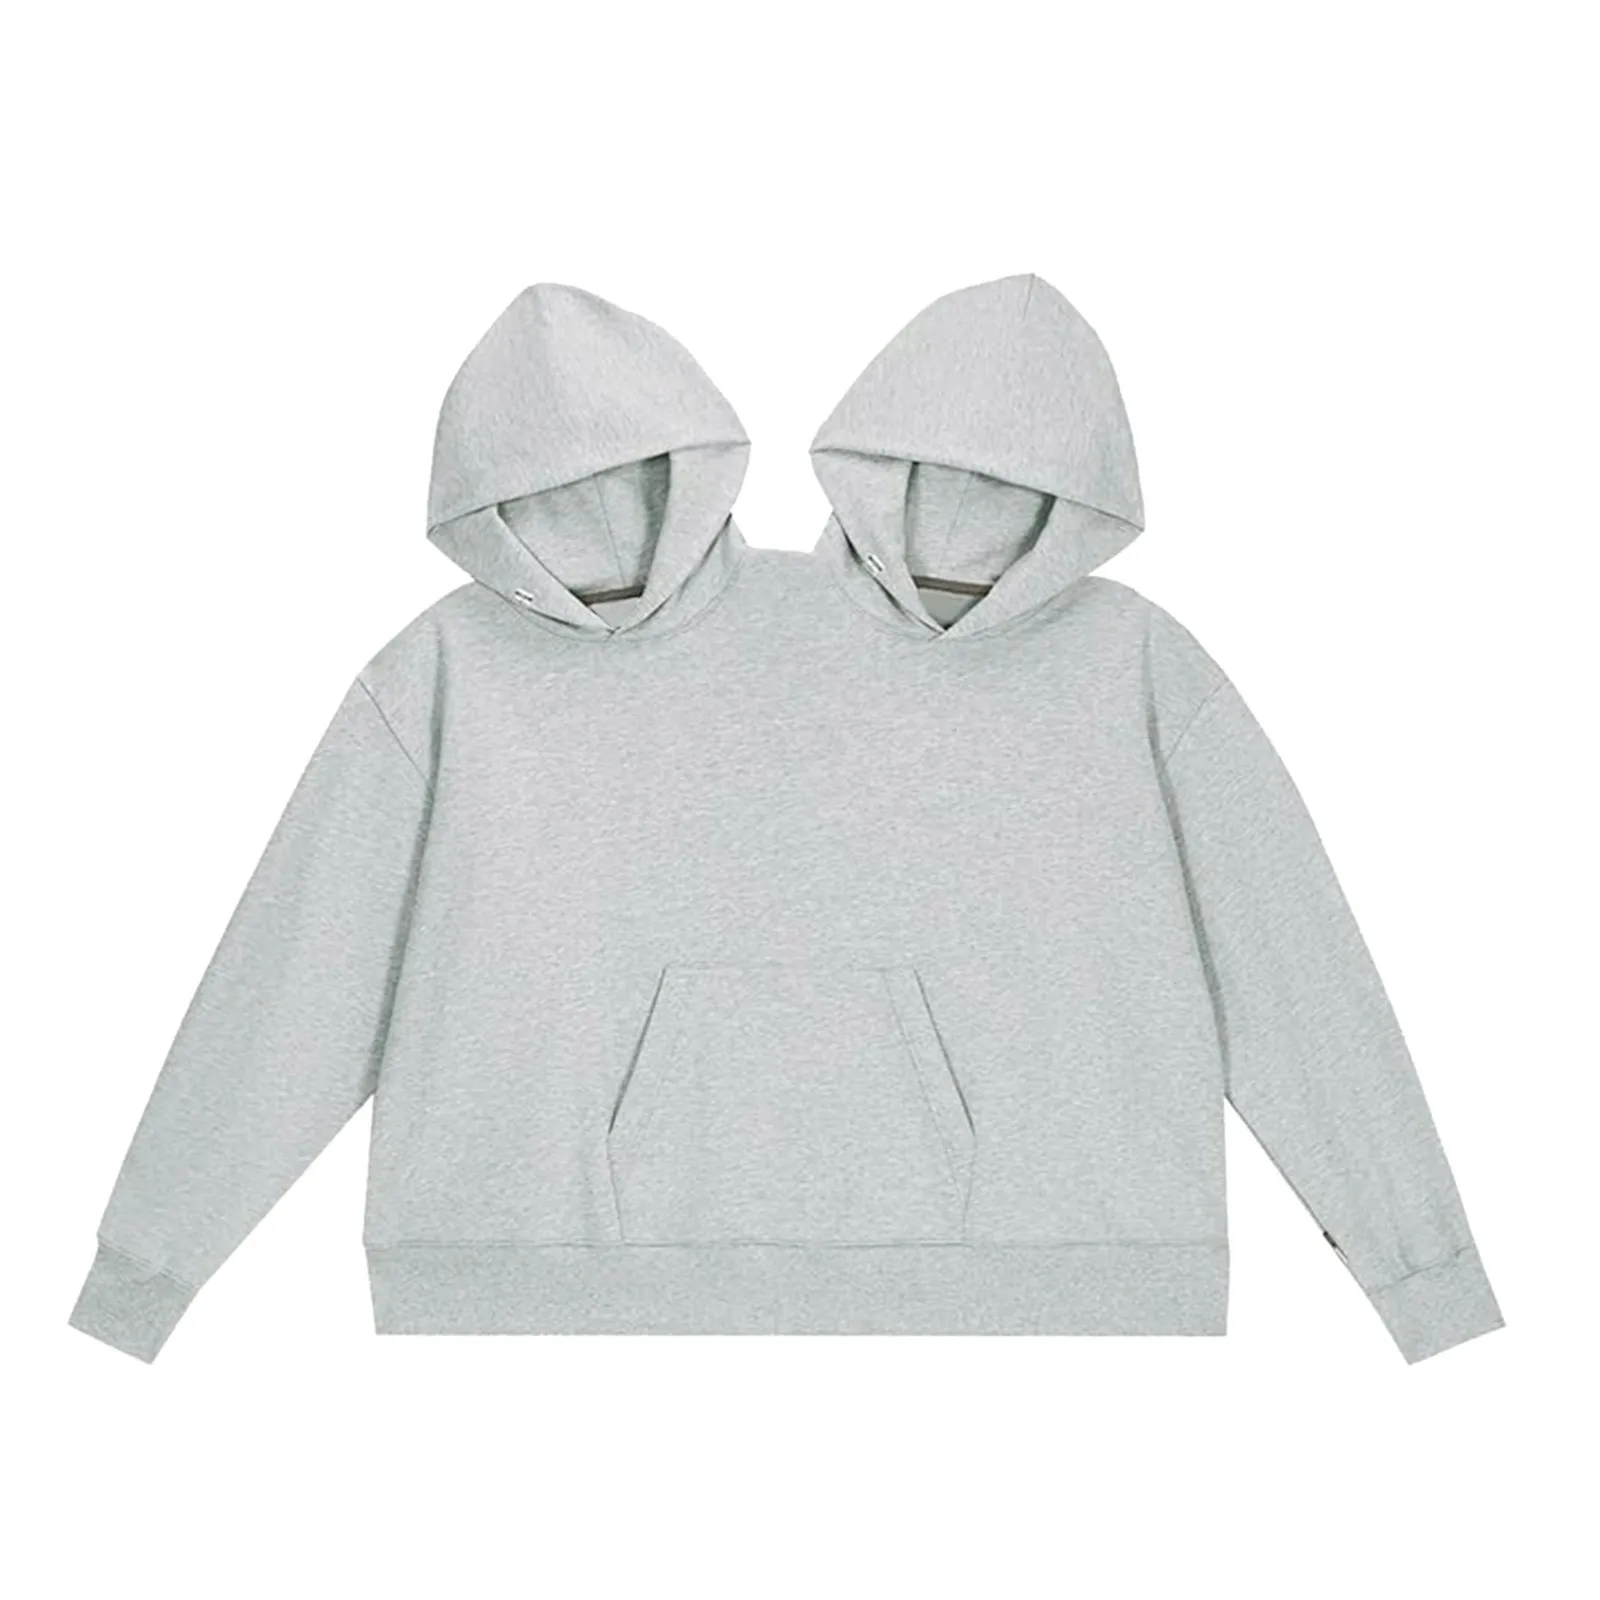 TIKTOK Same Hoodie Funny Couple Hooded Sweatshirt Oversize High Street Casual Pullover Fit Top For Two People Wearing Grey